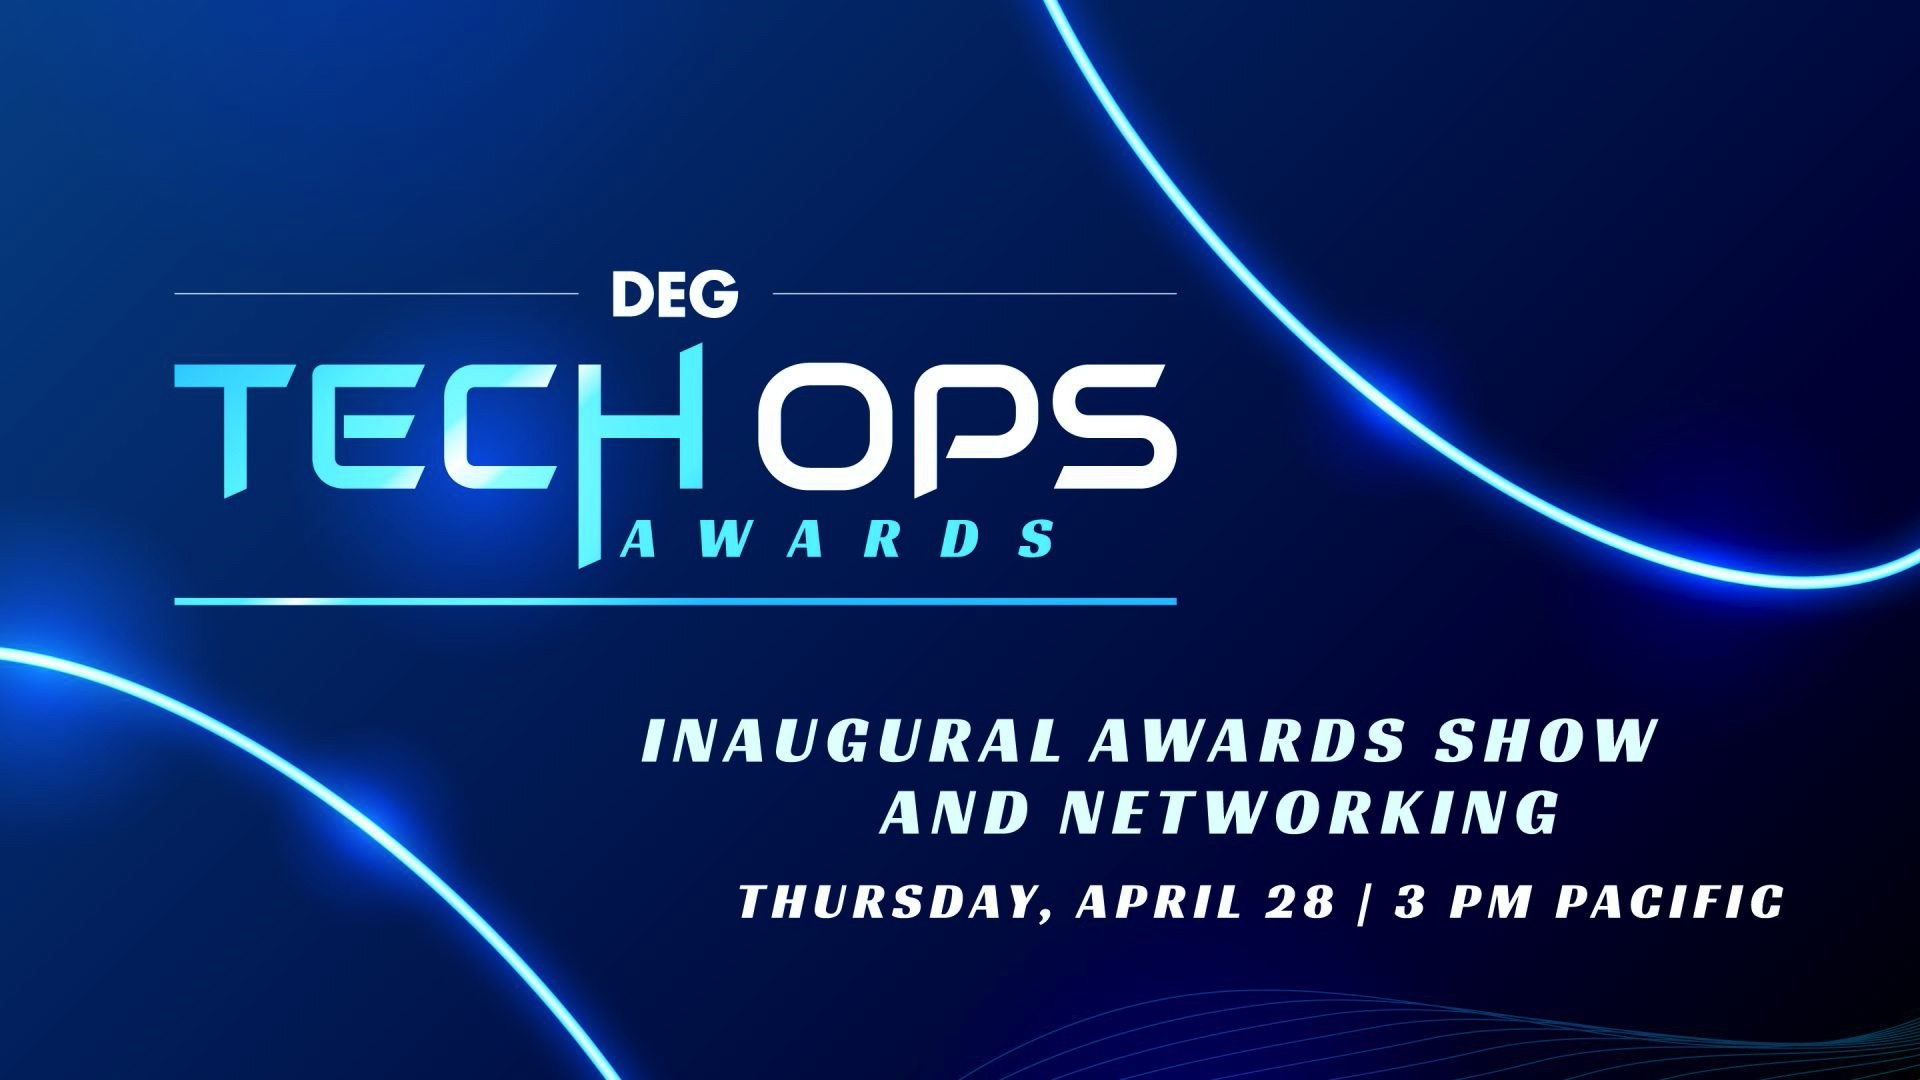 MovieLabs, and its staff, are honored to be shortlisted for several DEG TechOps Awards